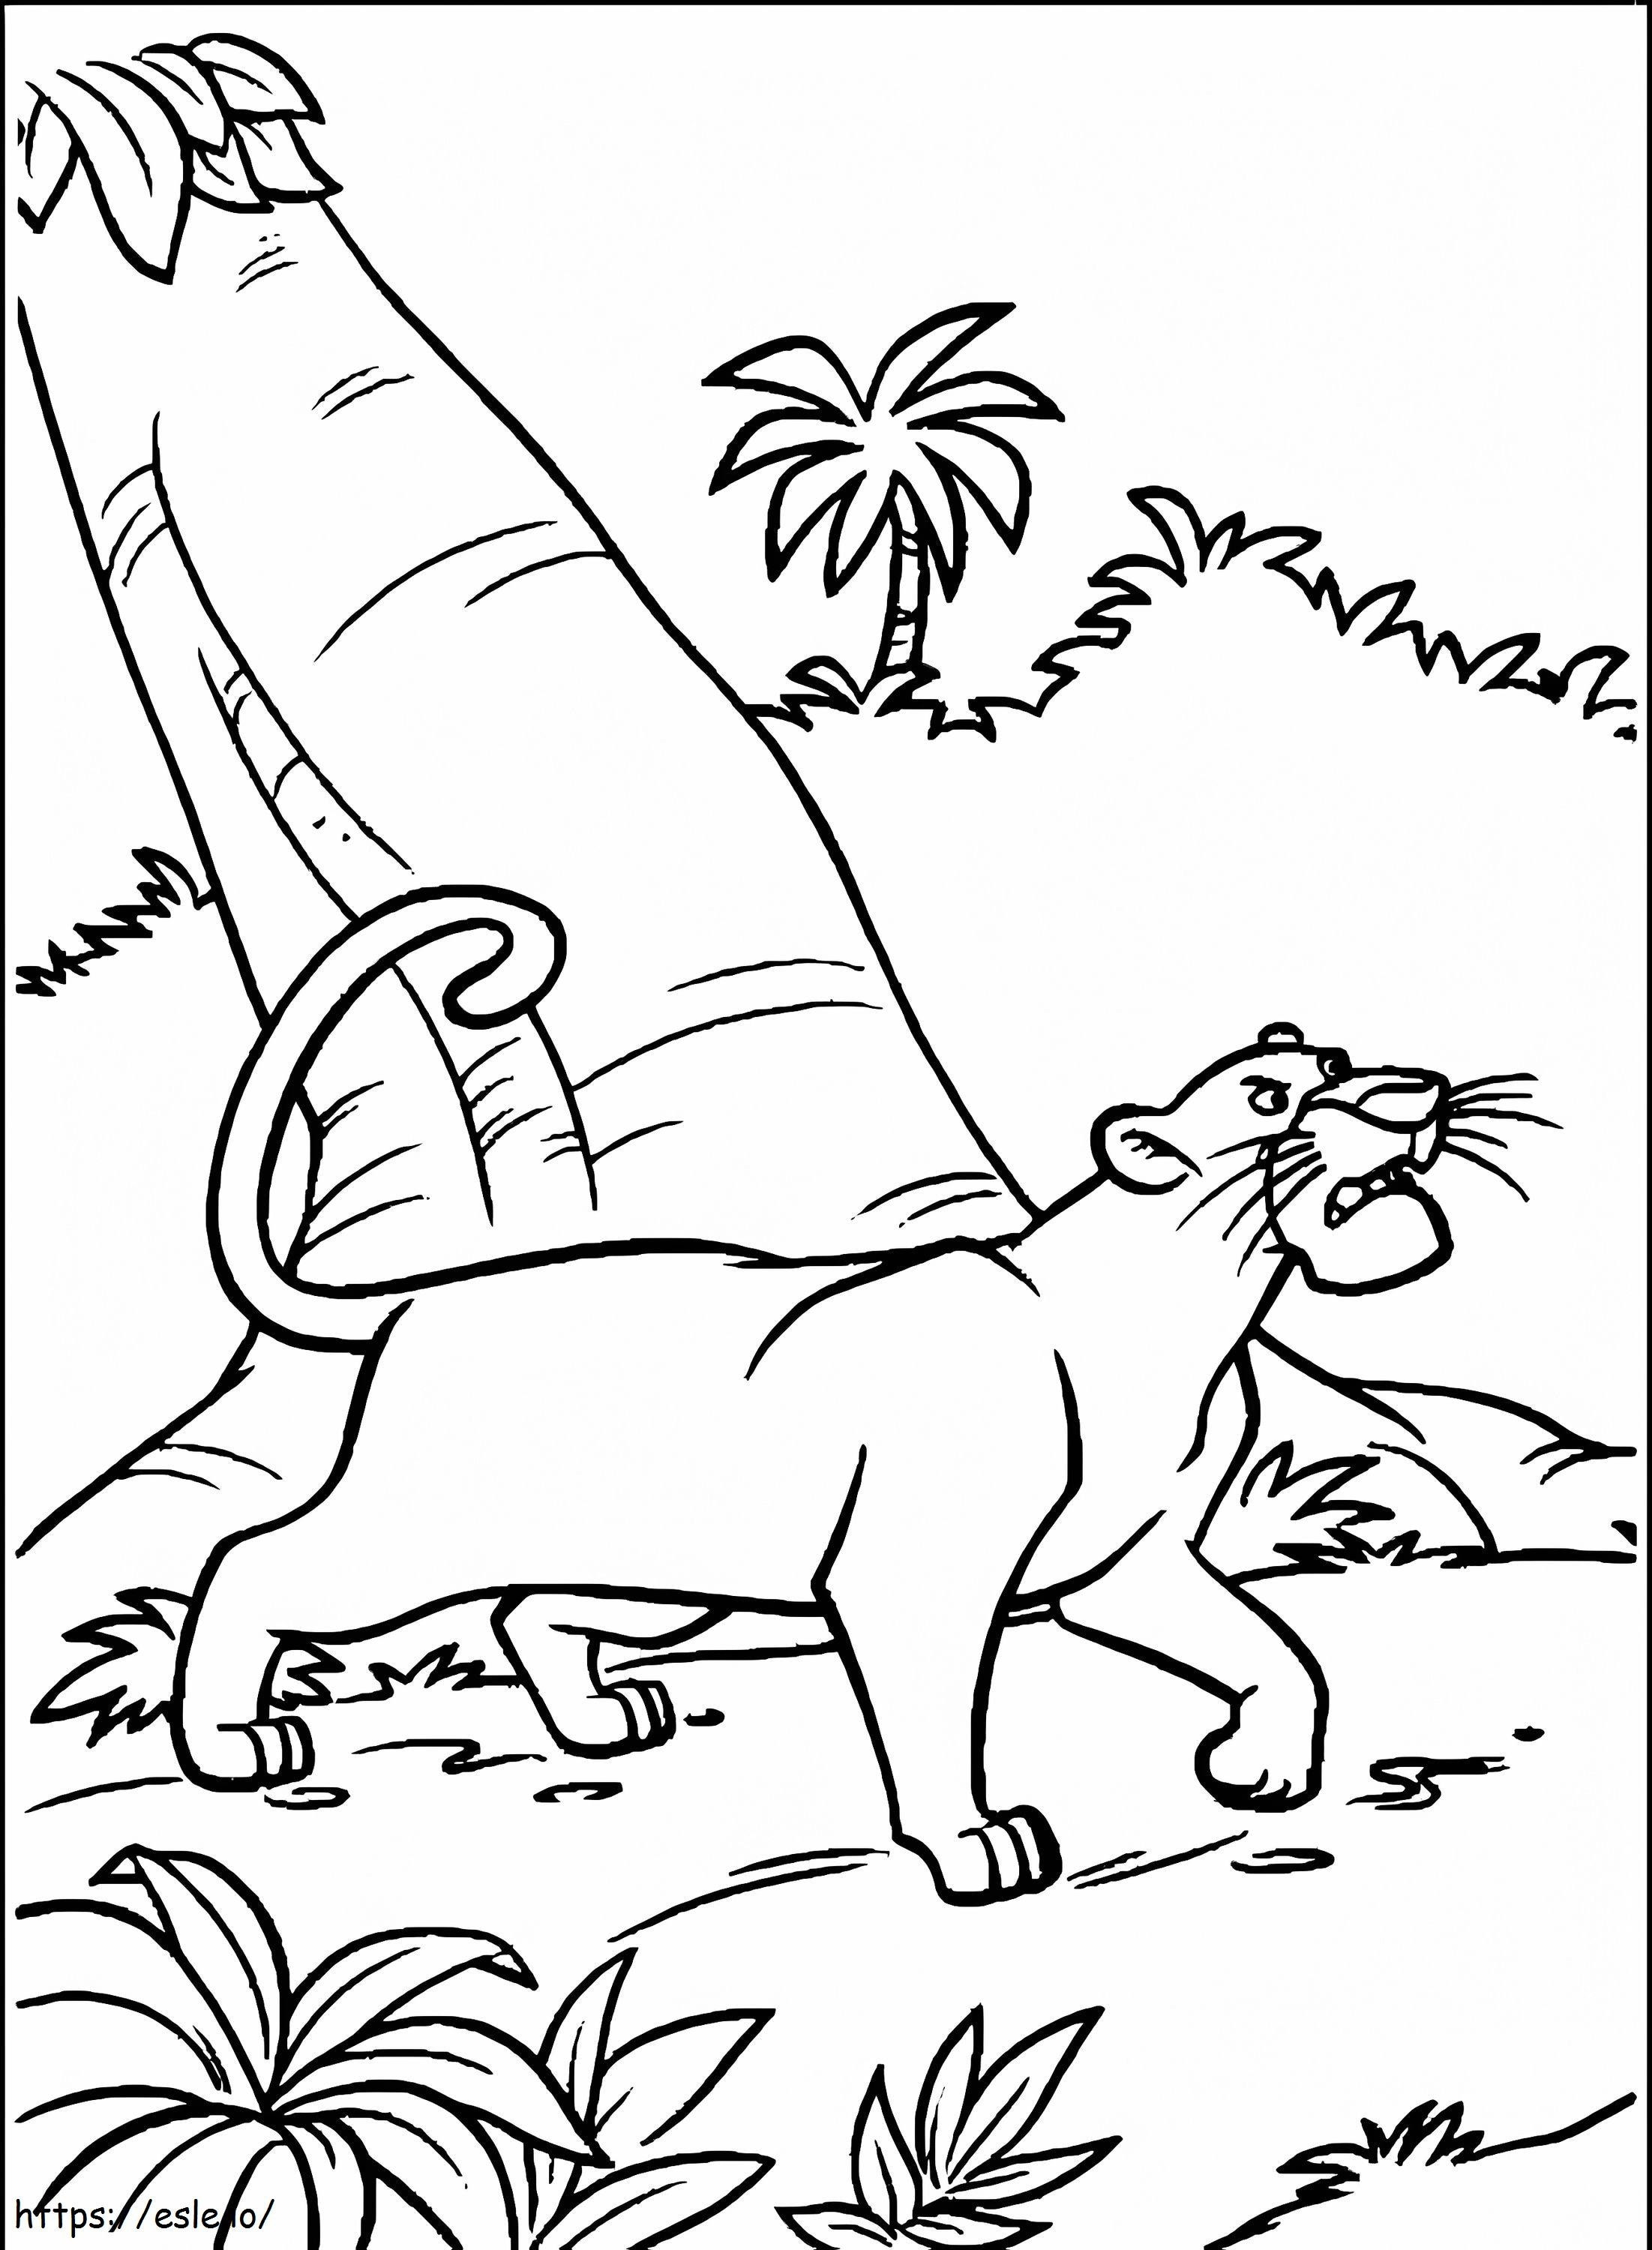 Bagheera Walking In The Jungle coloring page